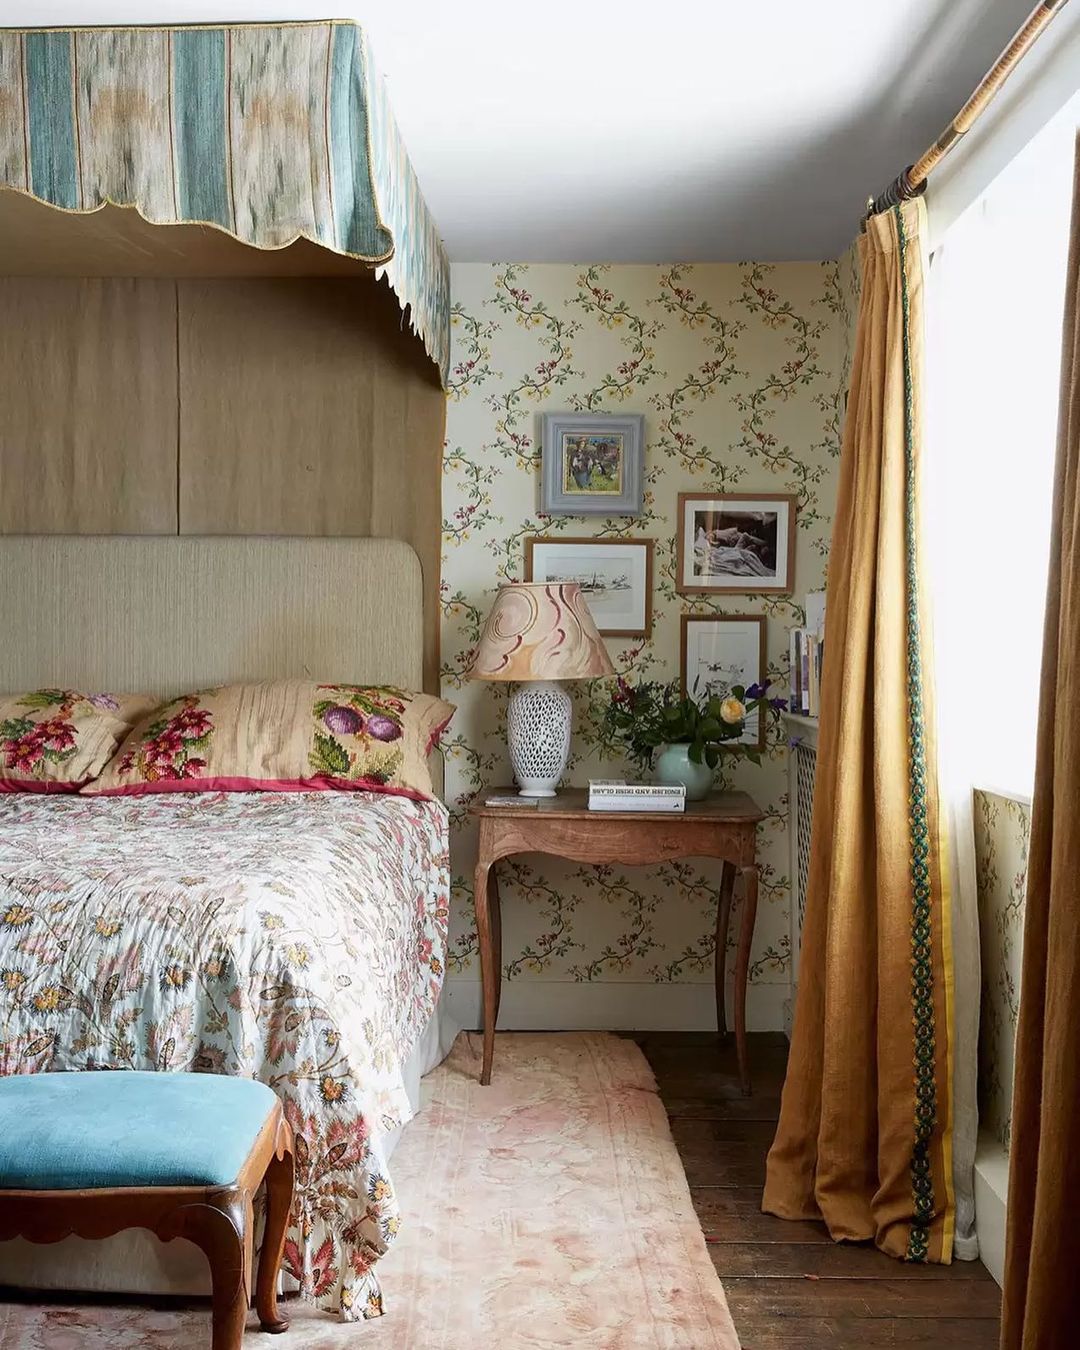 Bedroom with a Vintage Bed and Wallpaper using Cottagecore Design. Photo by Instagram user @houseandgardenuk